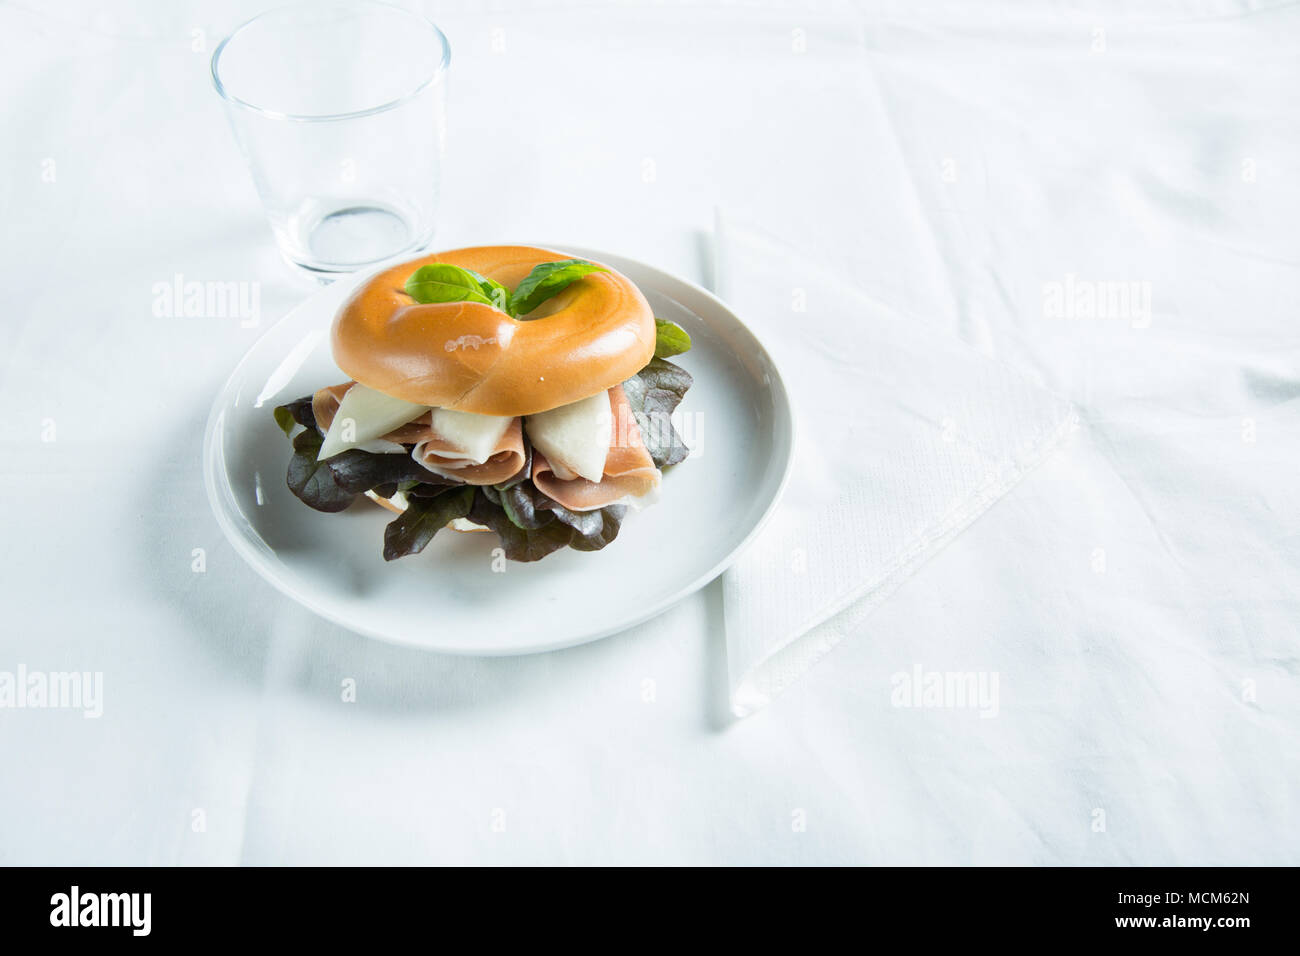 Bagel filled with ham, salad and some fruit. Stock Photo